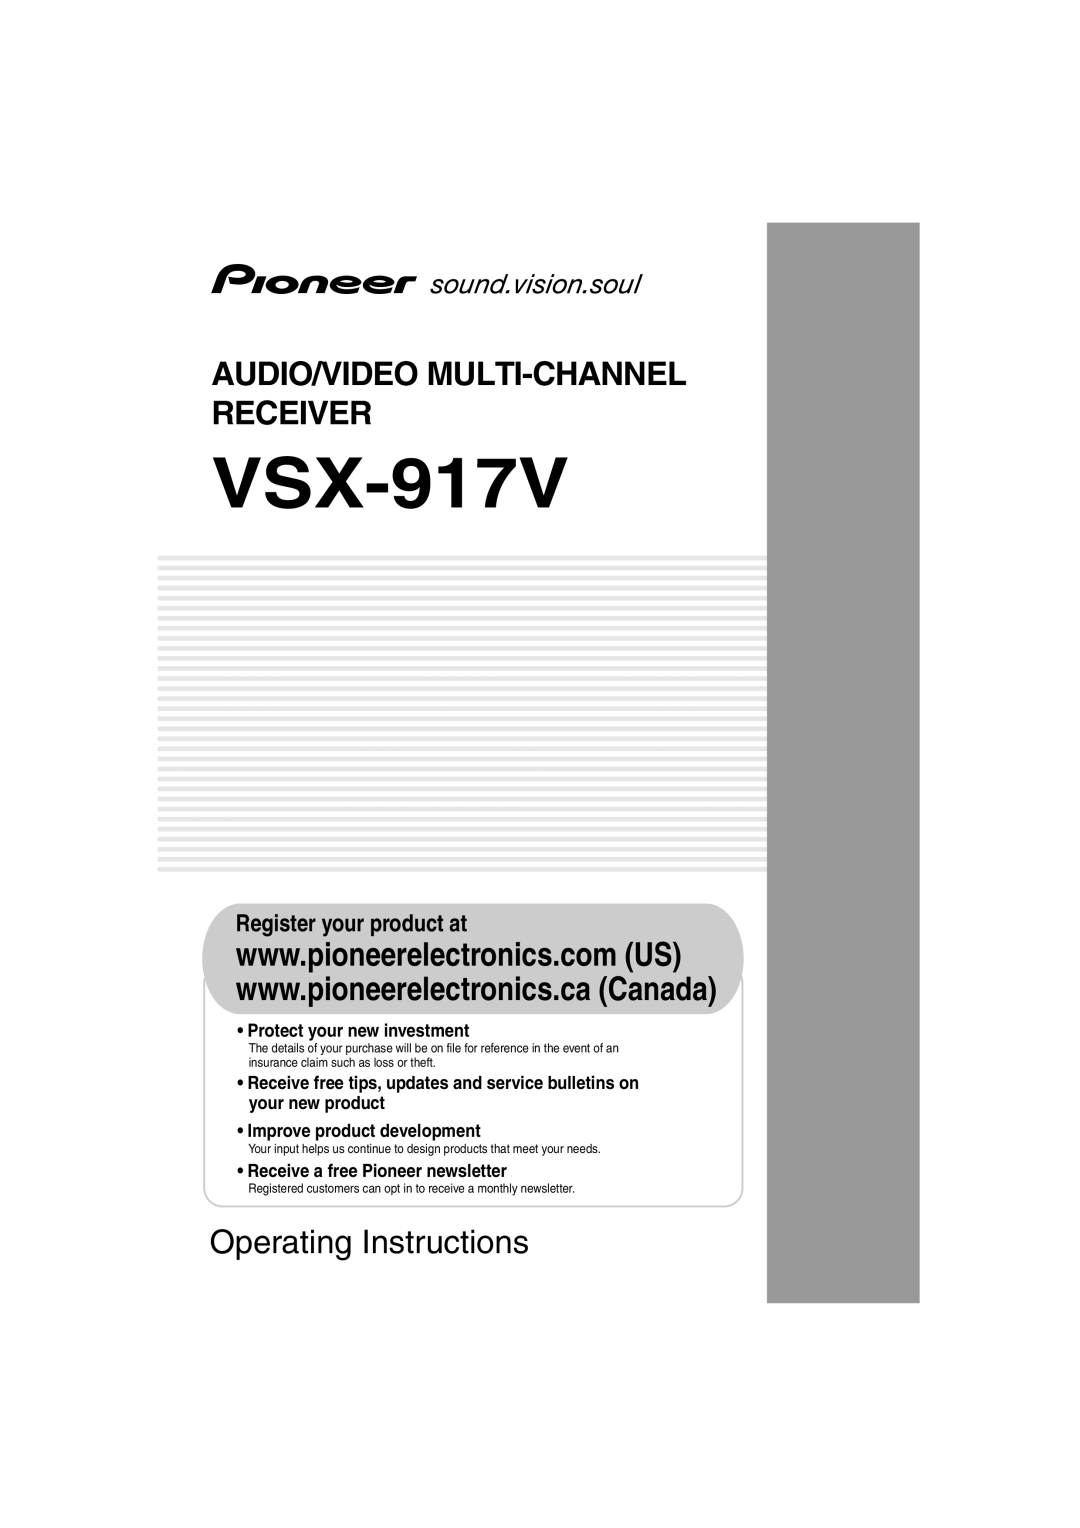 Pioneer VSX-917V manual Audio/Video Multi-Channel Receiver, Operating Instructions, Register your product at 